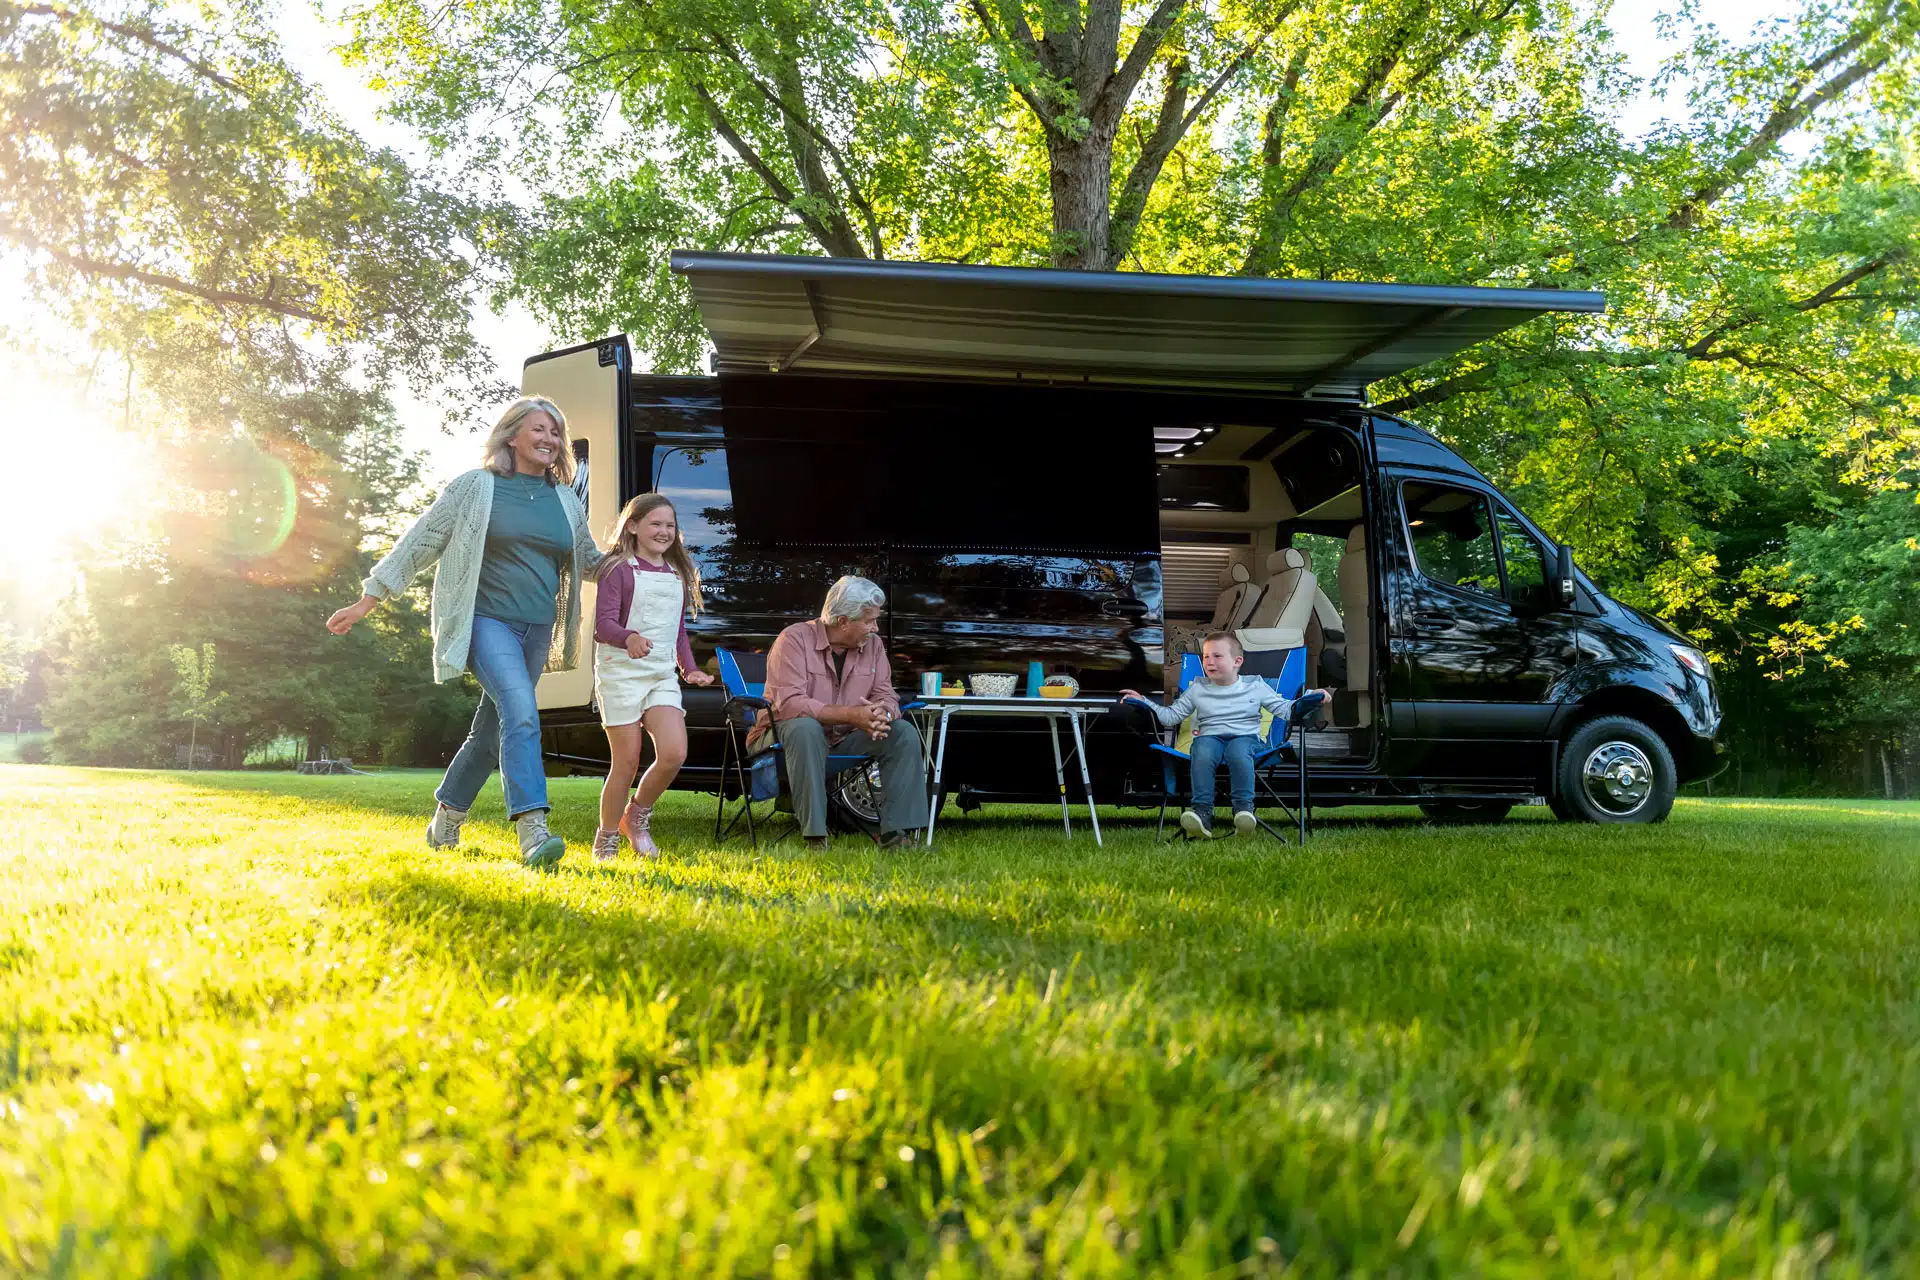 Our Mercedes Sprinter camper van showing a happy family enjoying the great outdoors.